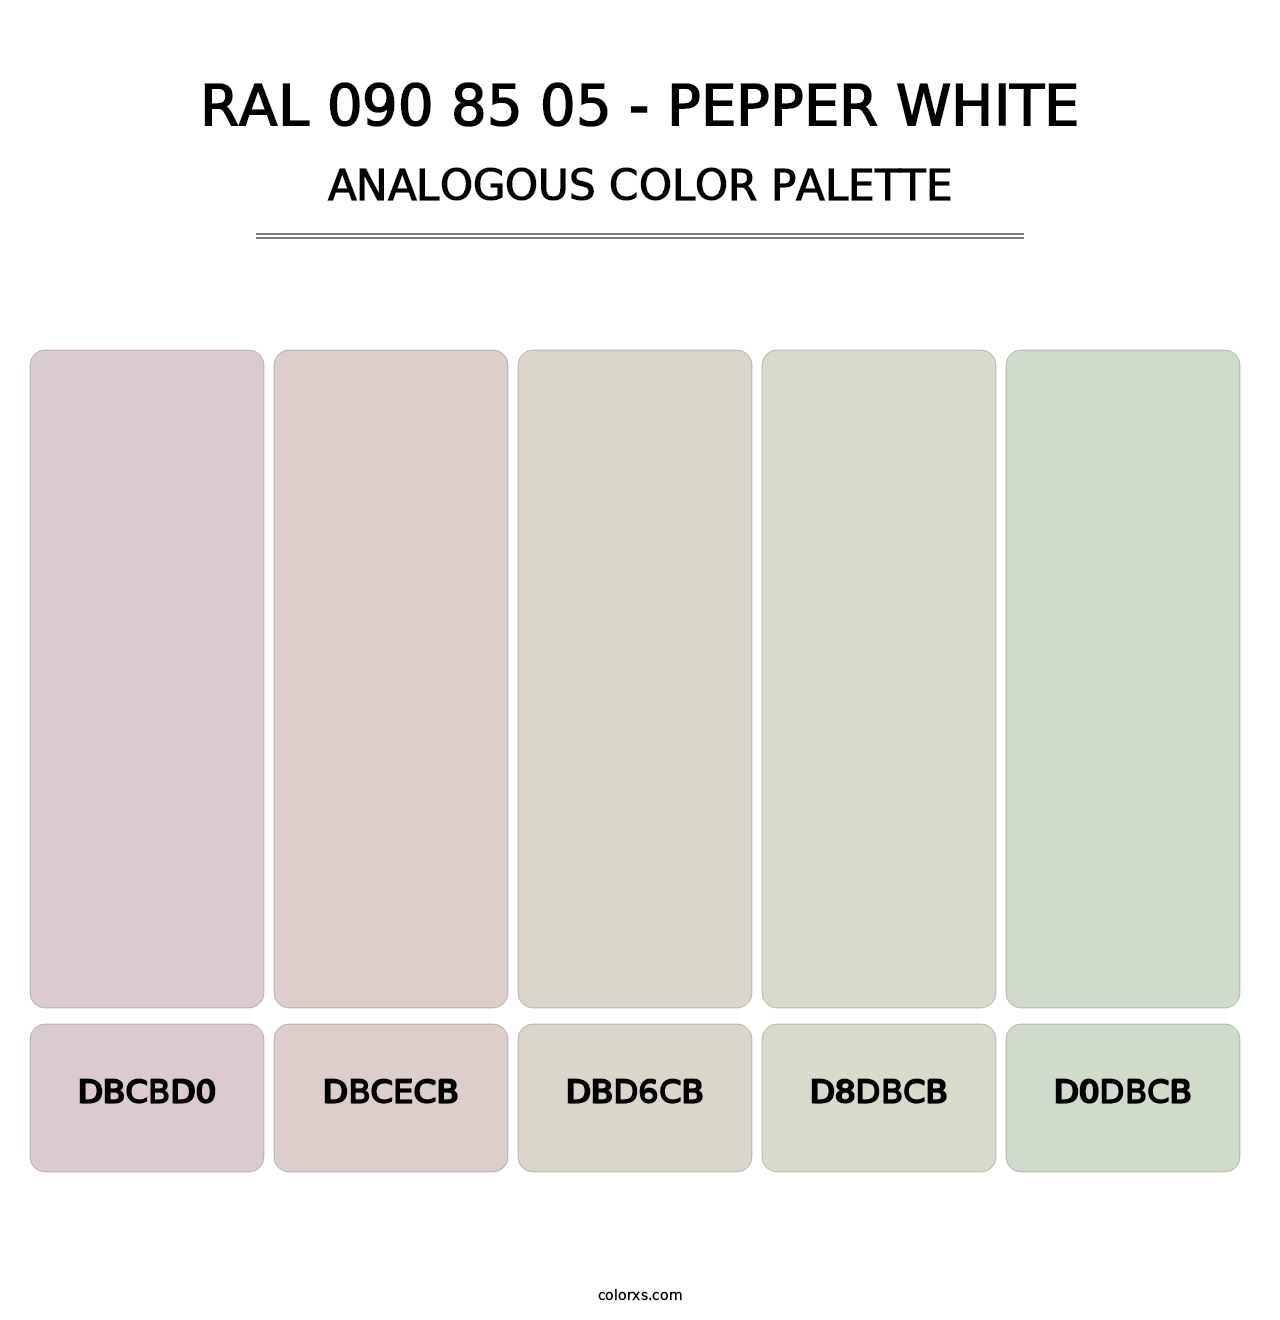 RAL 090 85 05 - Pepper White - Analogous Color Palette